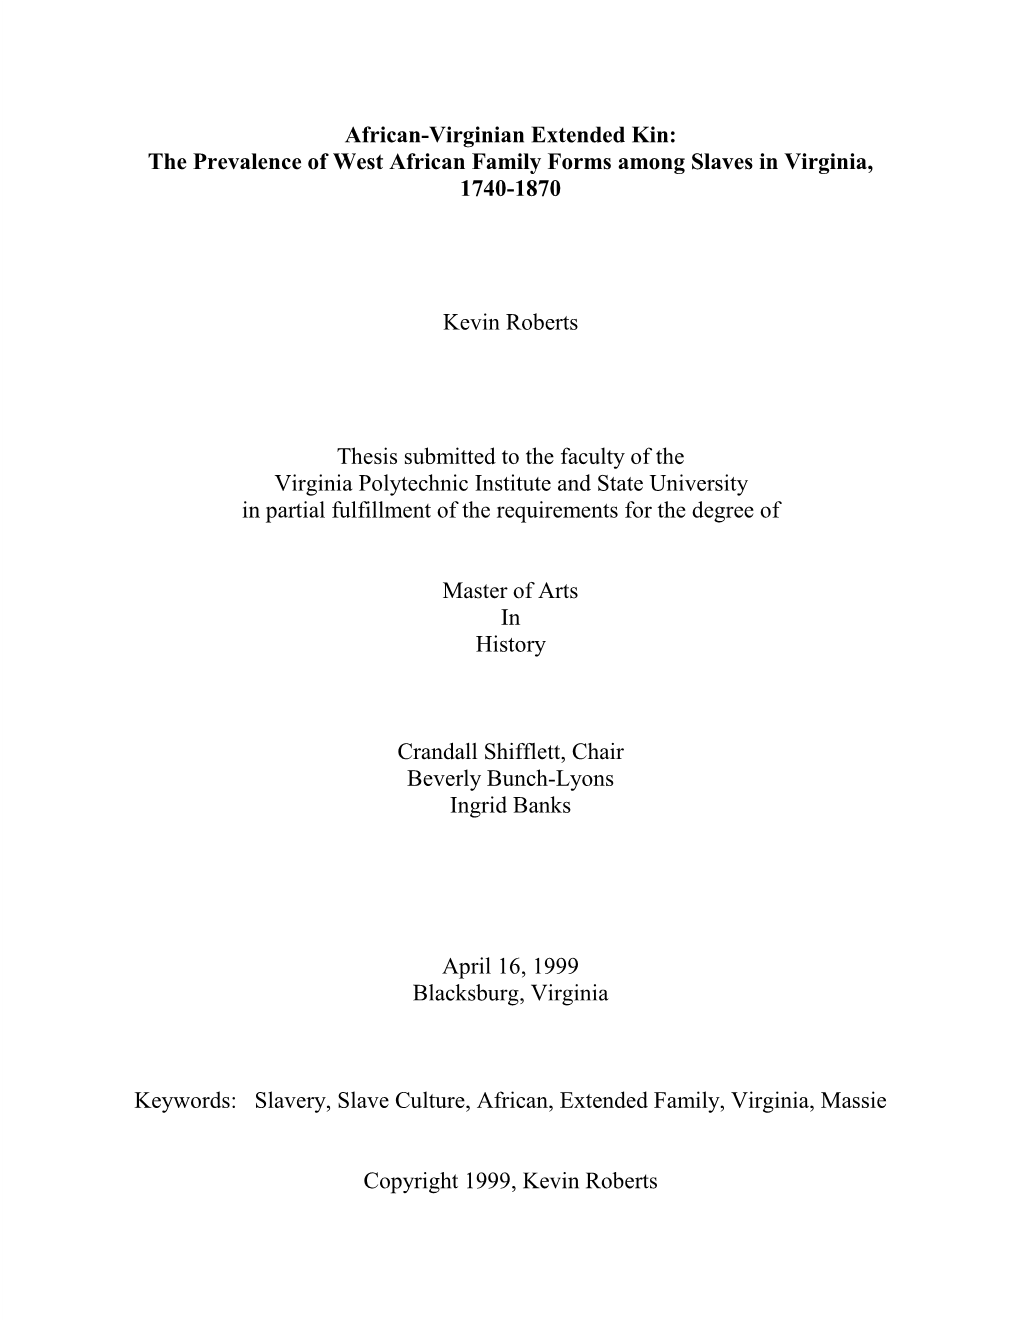 The Prevalence of West African Family Forms Among Slaves in Virginia, 1740-1870